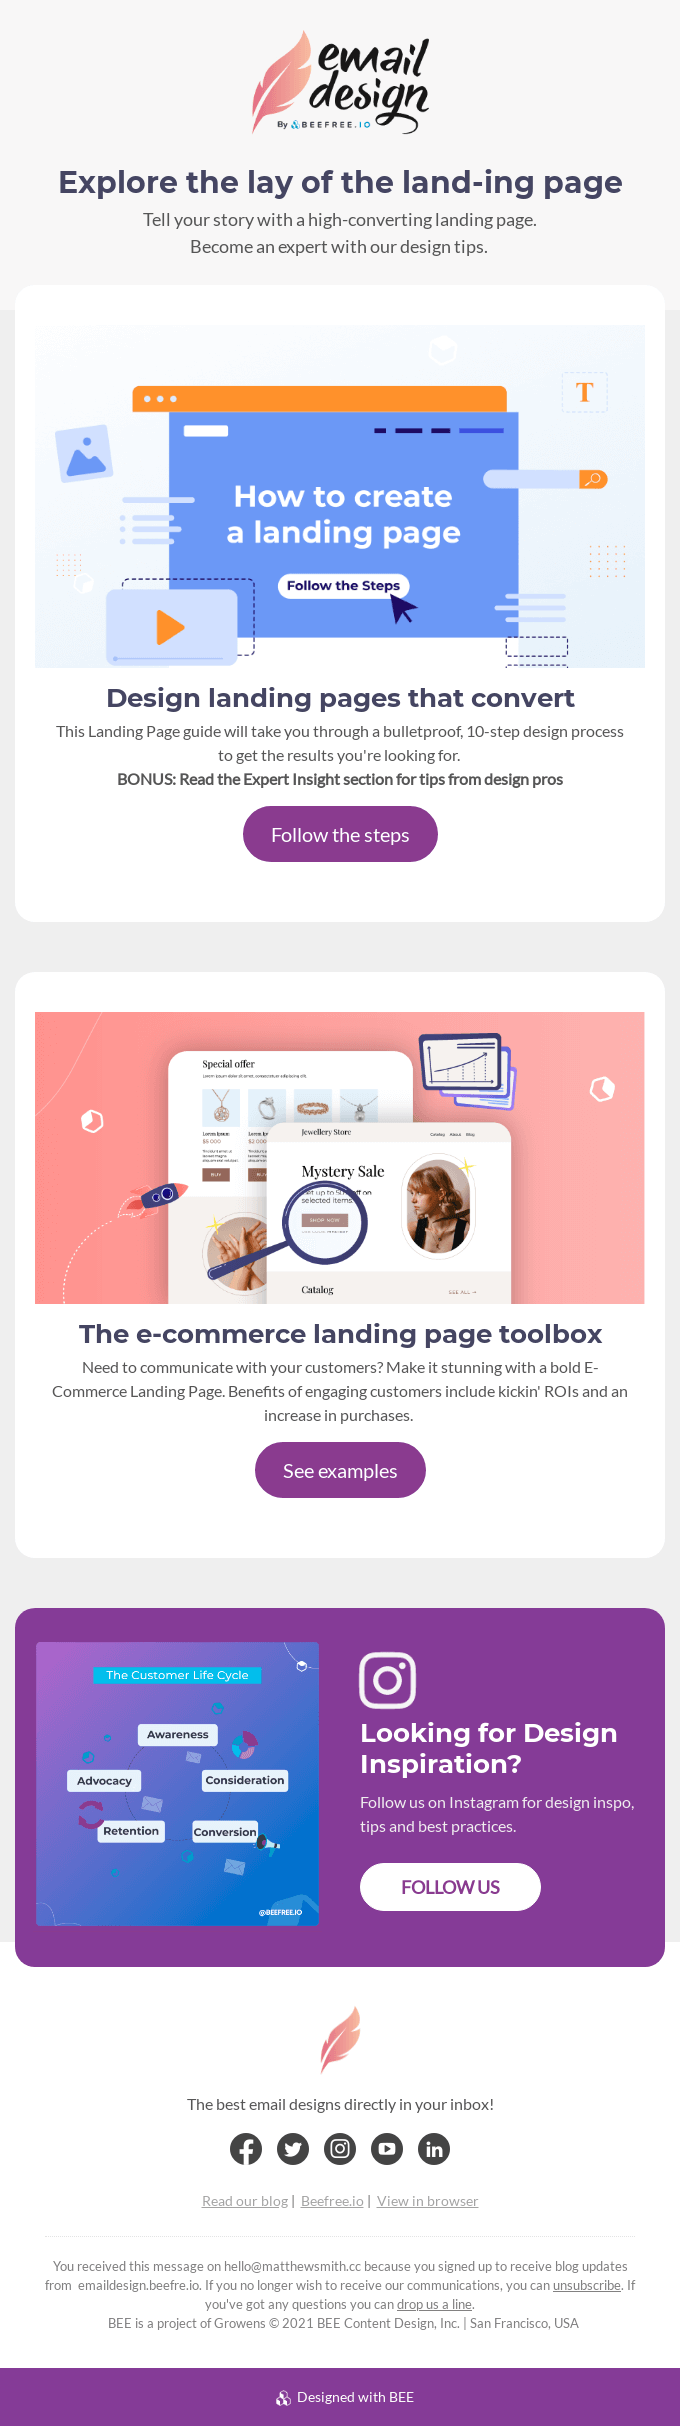 Email Design Blog | Landing Page Party